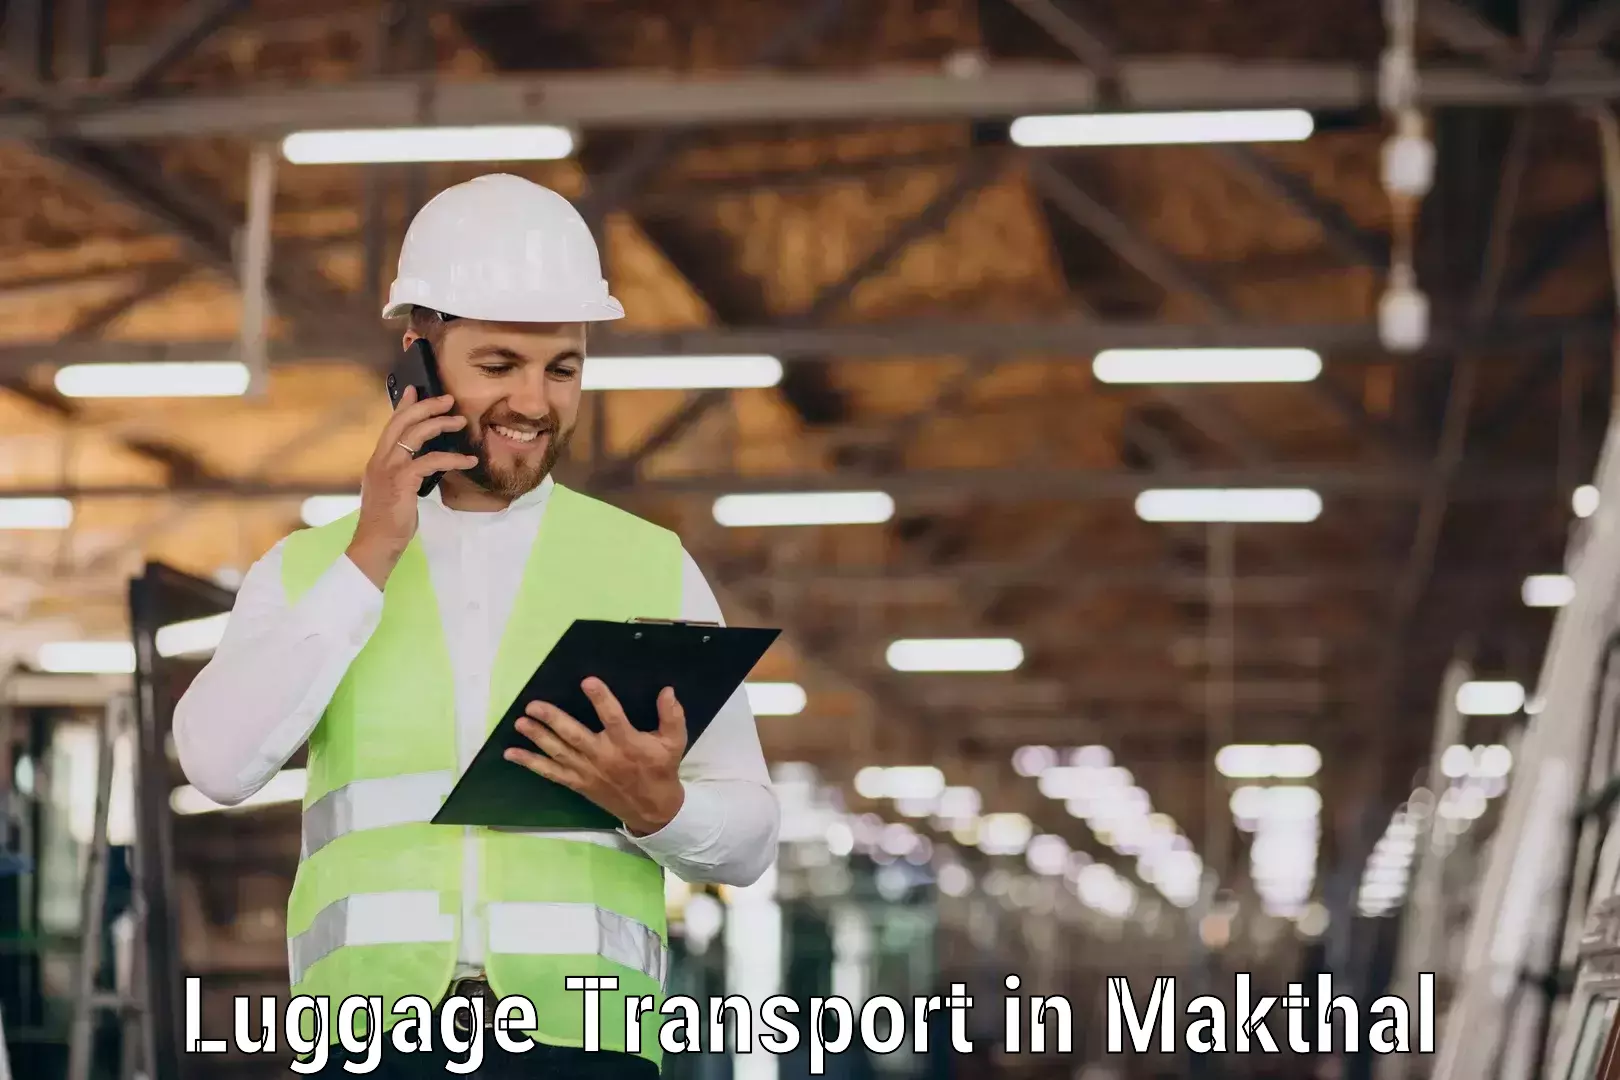 Luggage shipment specialists in Makthal